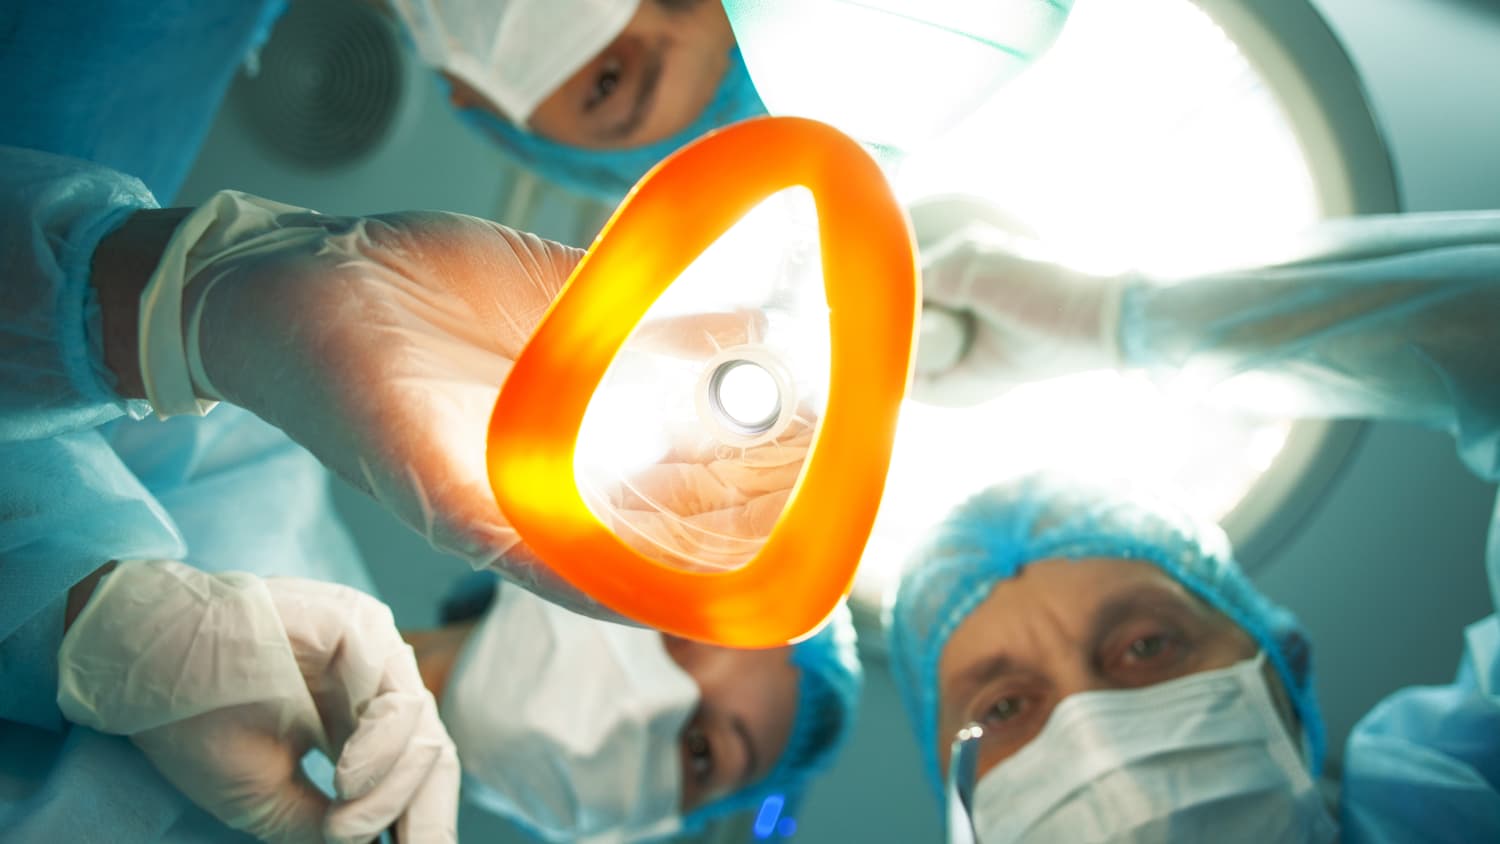 POV of patient undergoing anesthesia before surgery